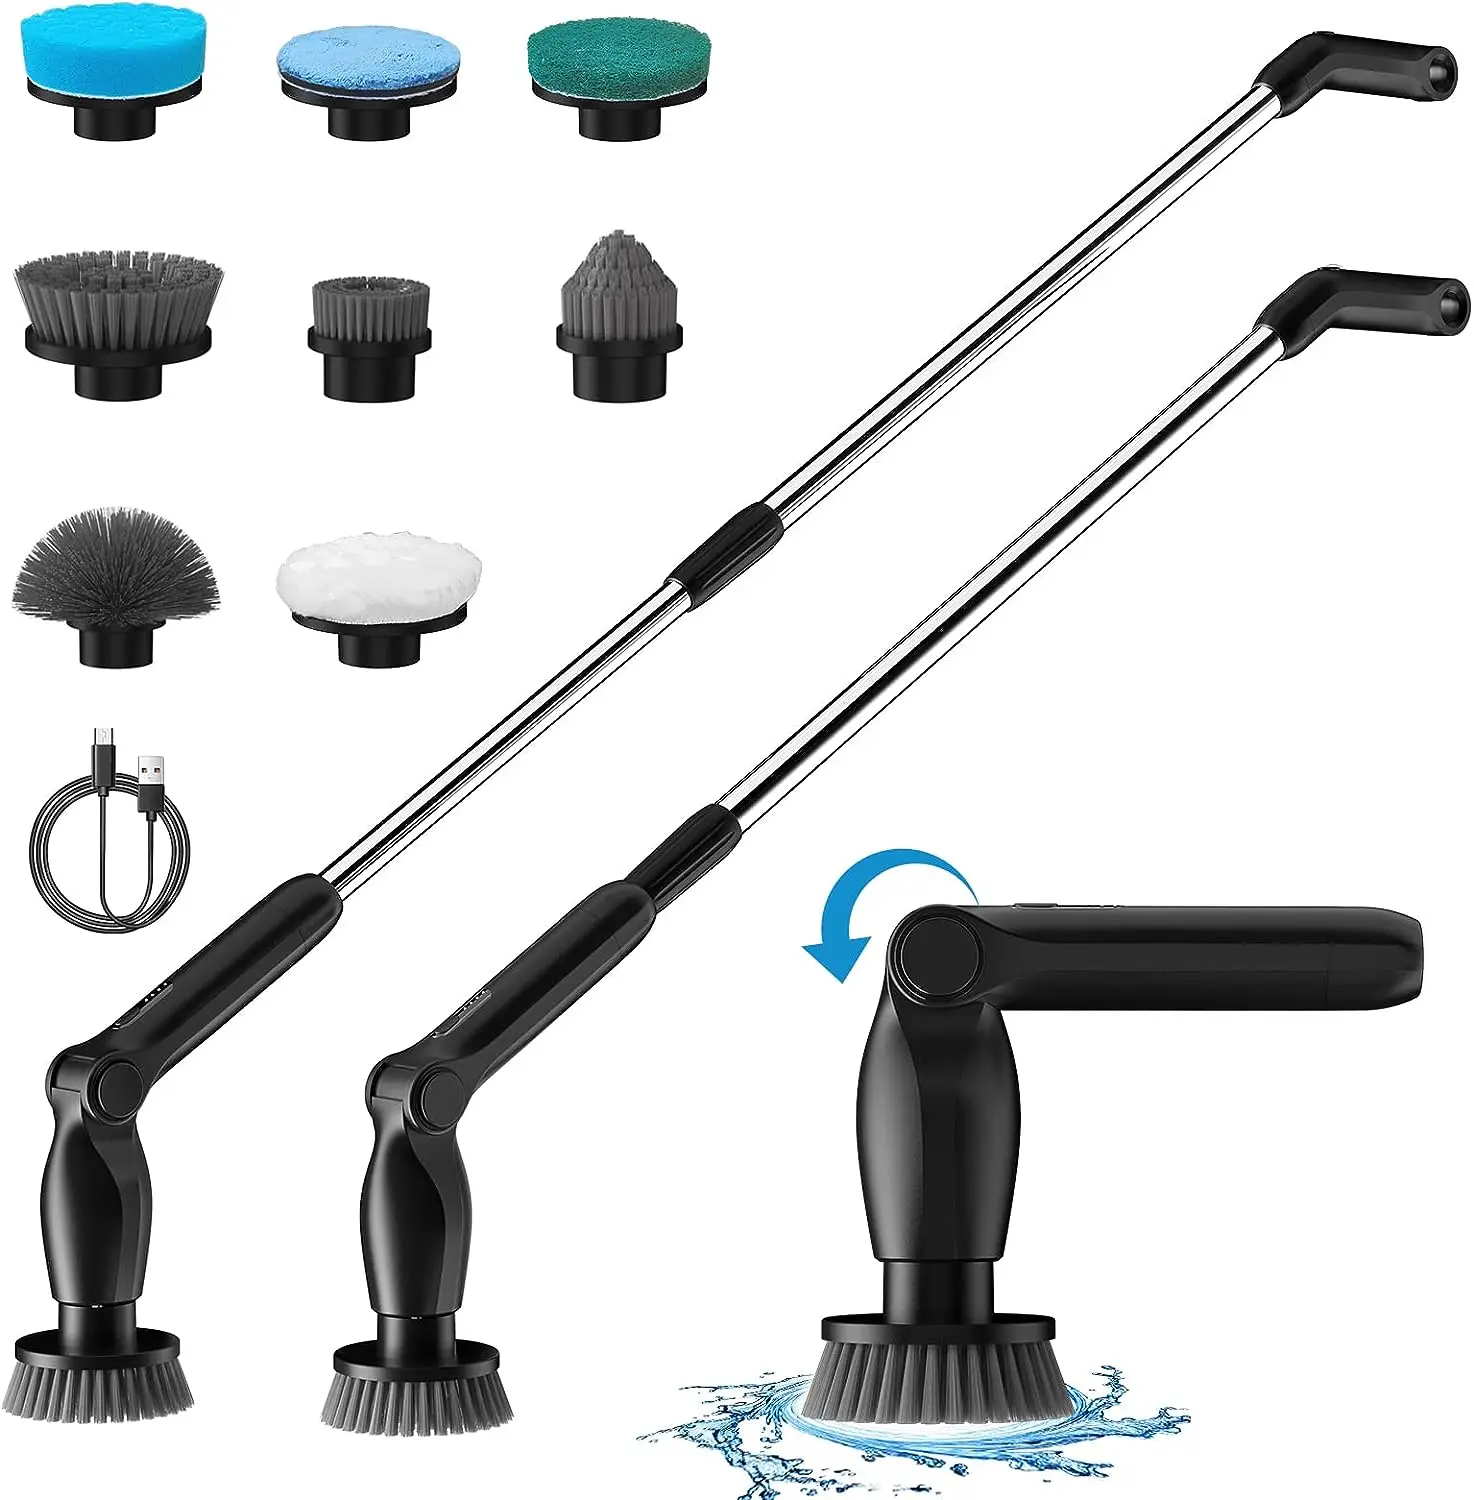 https://ae01.alicdn.com/kf/S4ee148f78a3744389d04a4acfad35b59A/Leebein-2023-Electric-Spin-Scrubber-Cordless-Cleaning-Brush-with-8-Replaceable-Brush-Heads.jpg